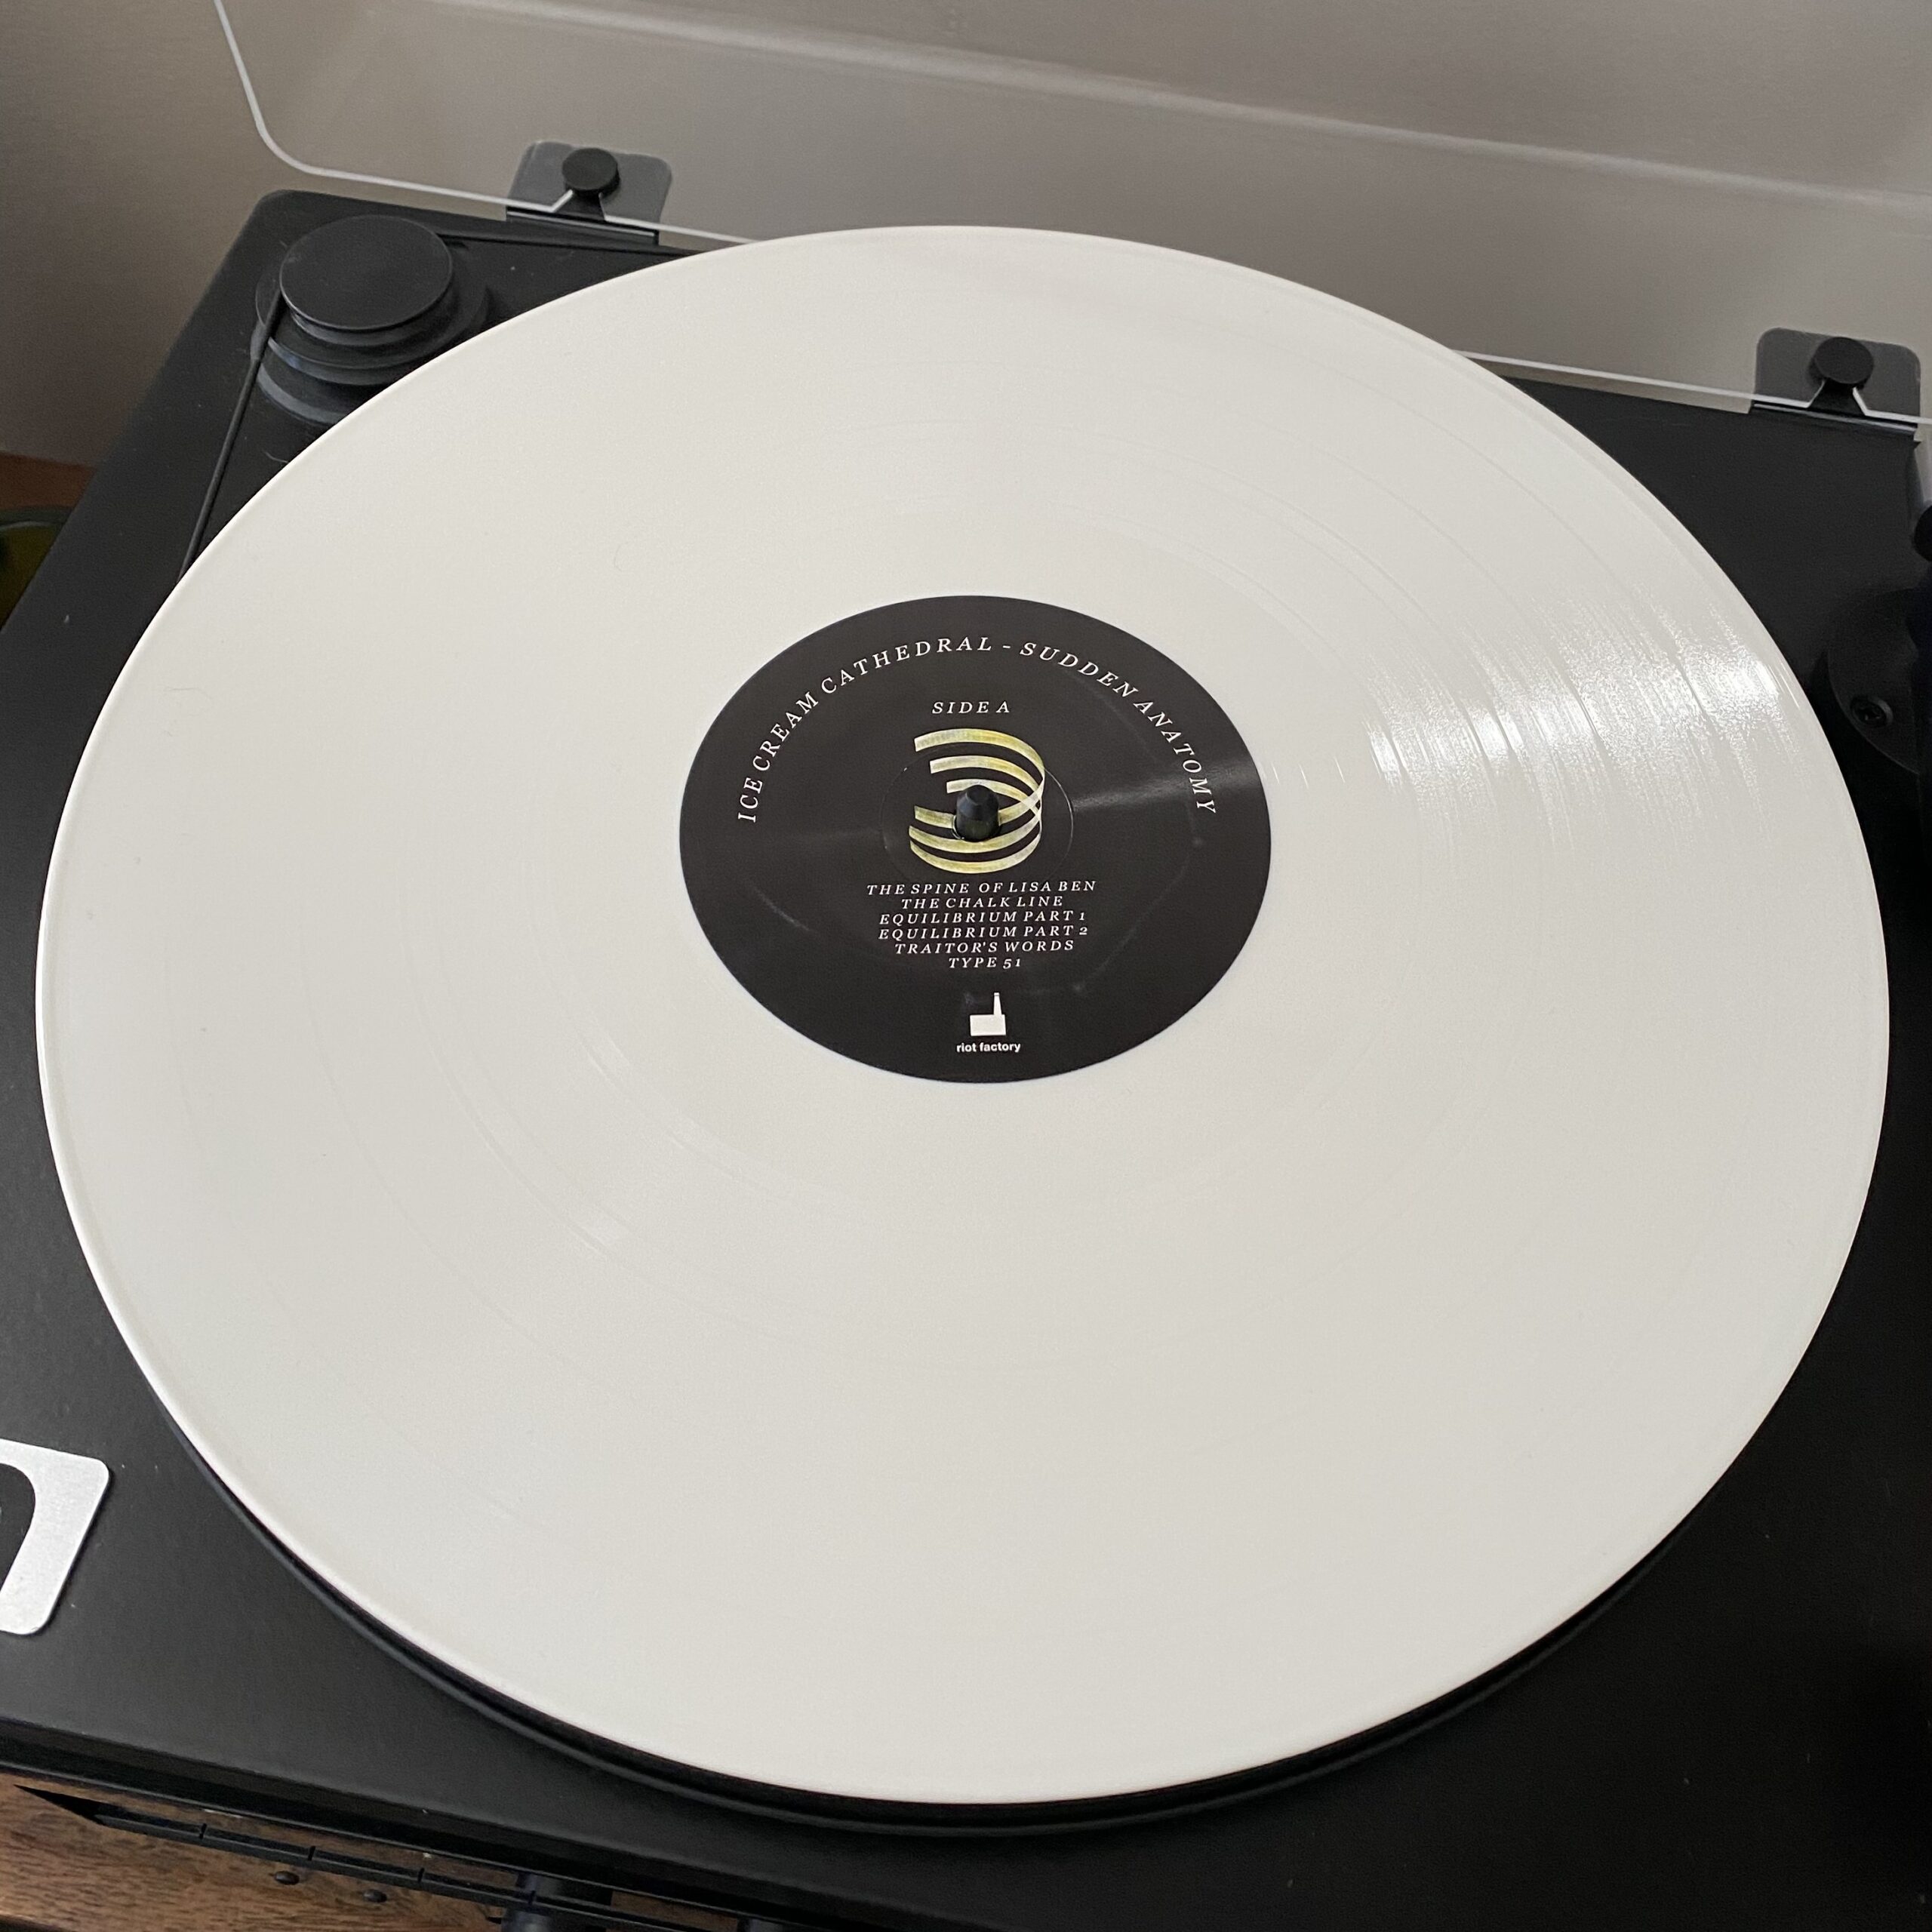 Image description: Ice Cream Cathedral's "Sudden Anatomy" vinyl album is on a record player. The album is white and has a black circle at the middle that shows the titles for Side A. "The Spine of Lisa Ben" is the first track on Side A.